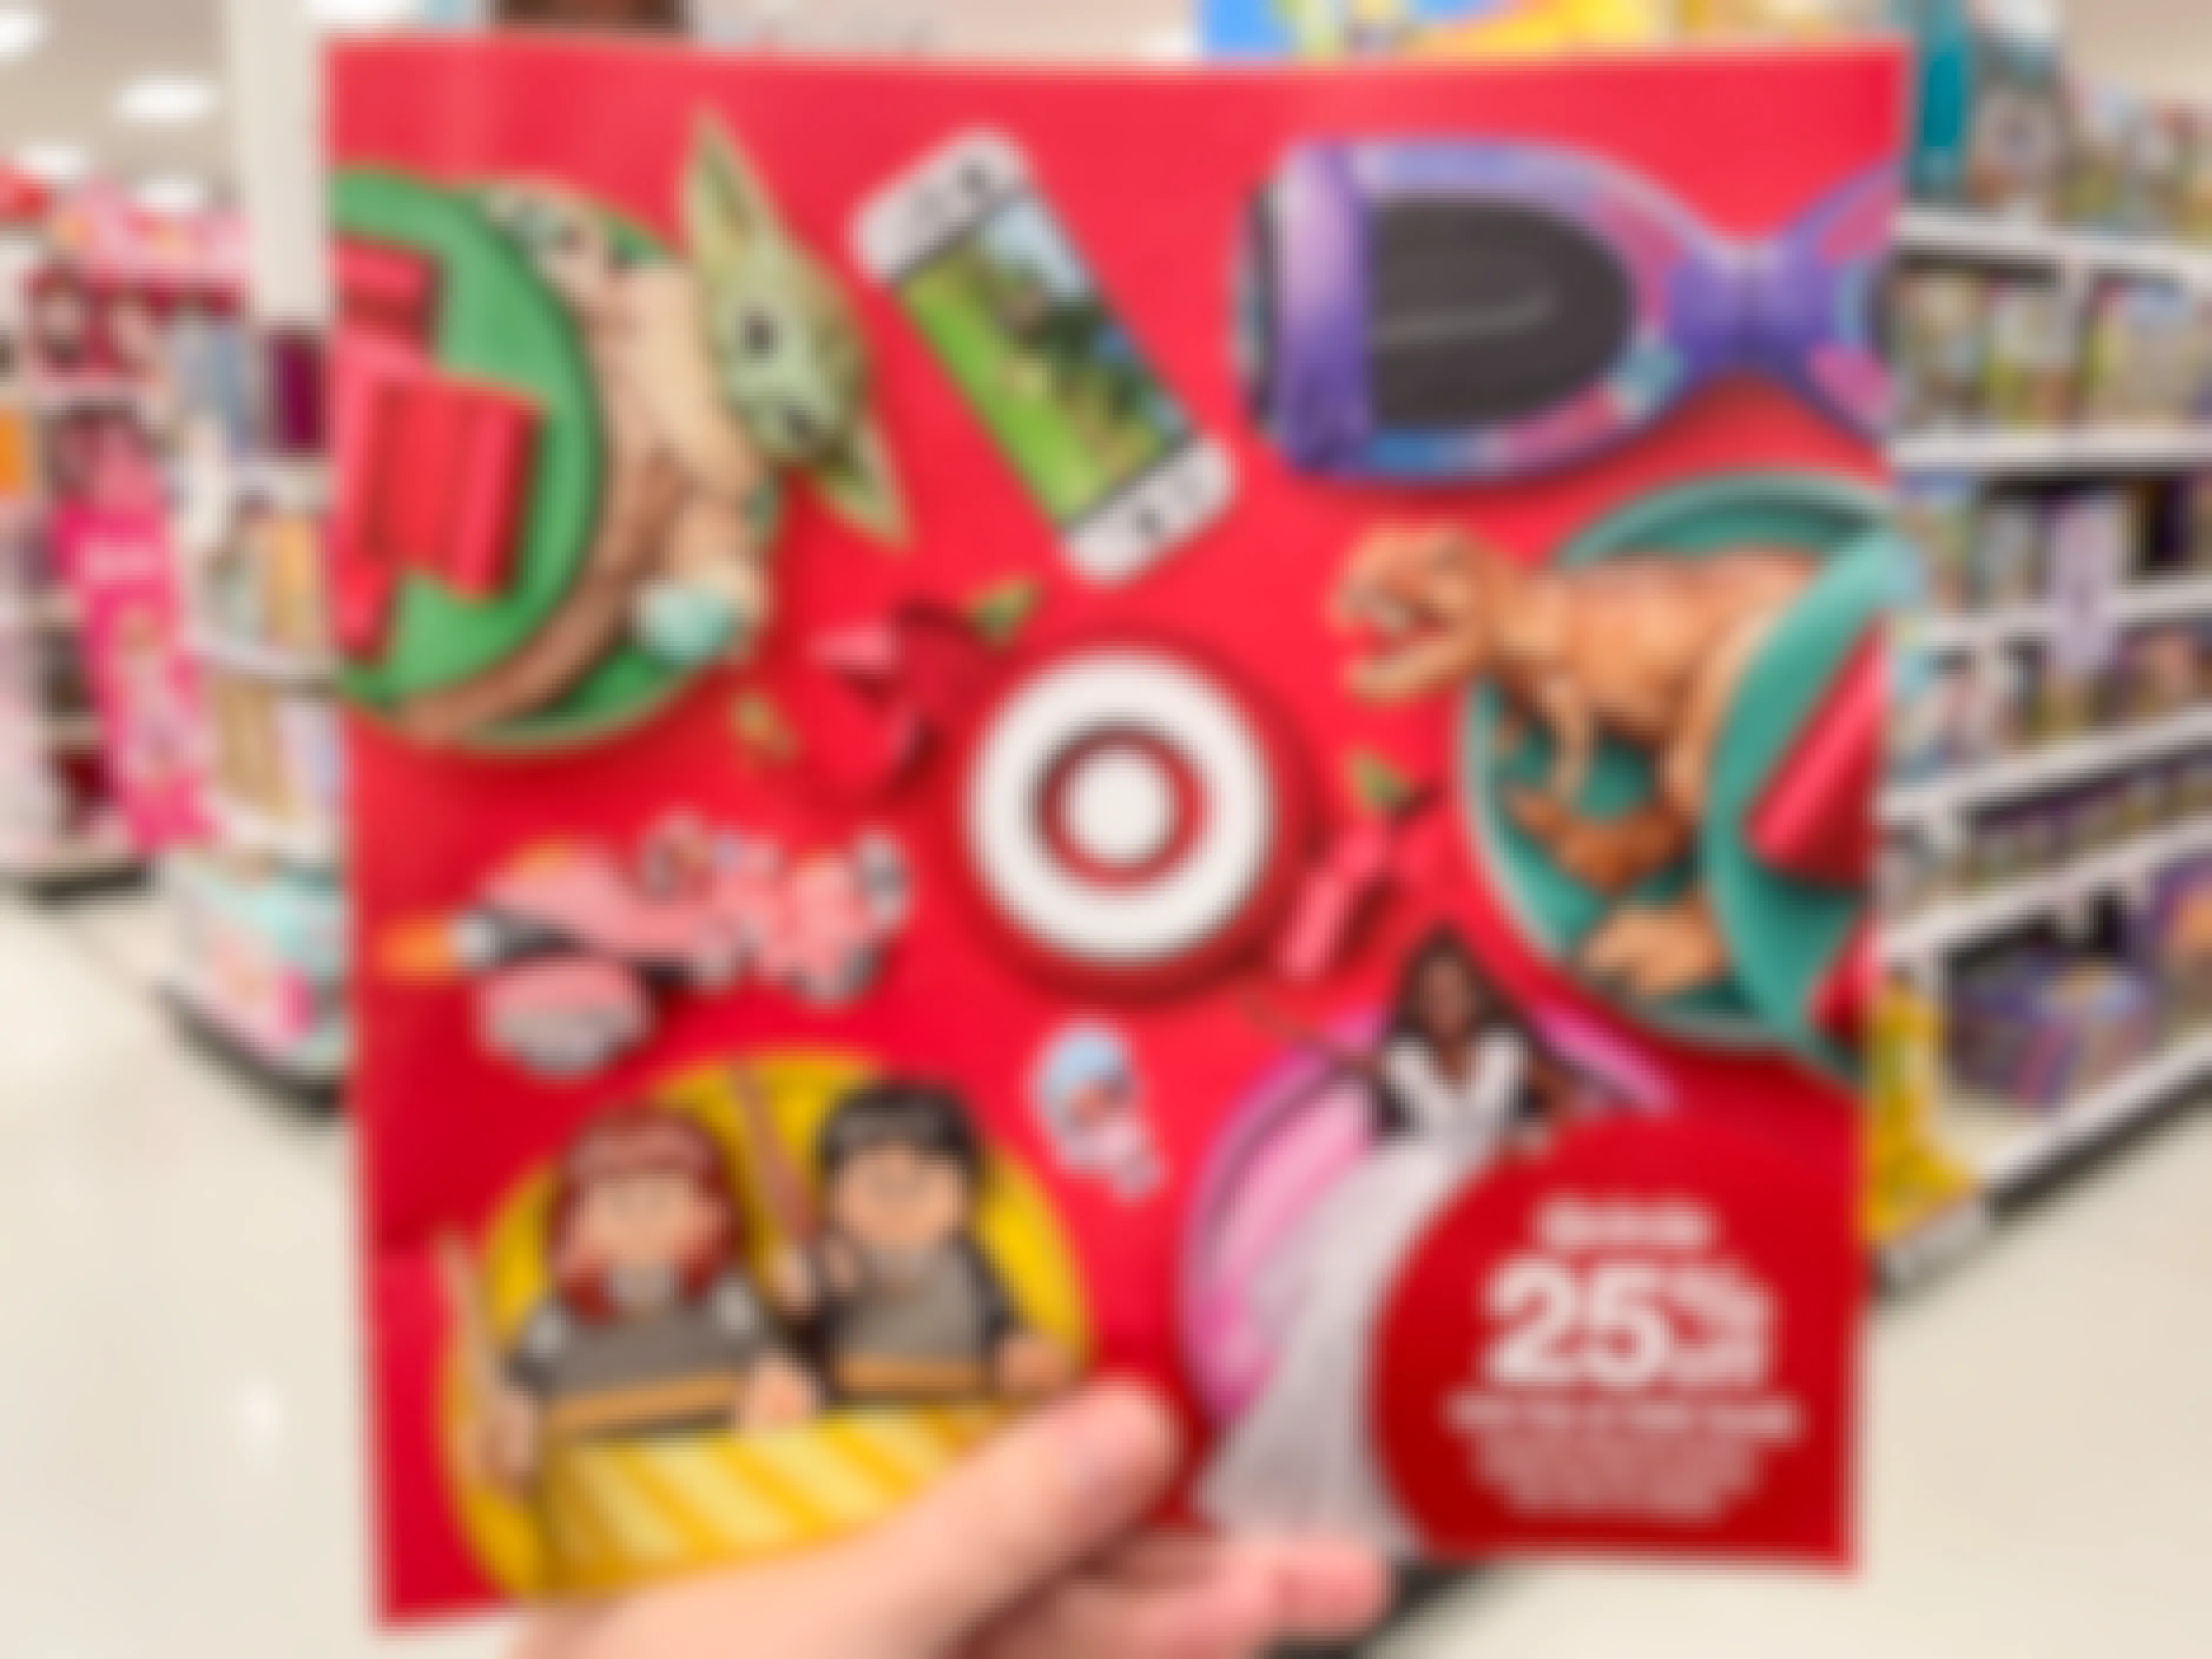 The Target Toy Book ad for 25% off a toy or kid's book being held in a Target toy aisle.